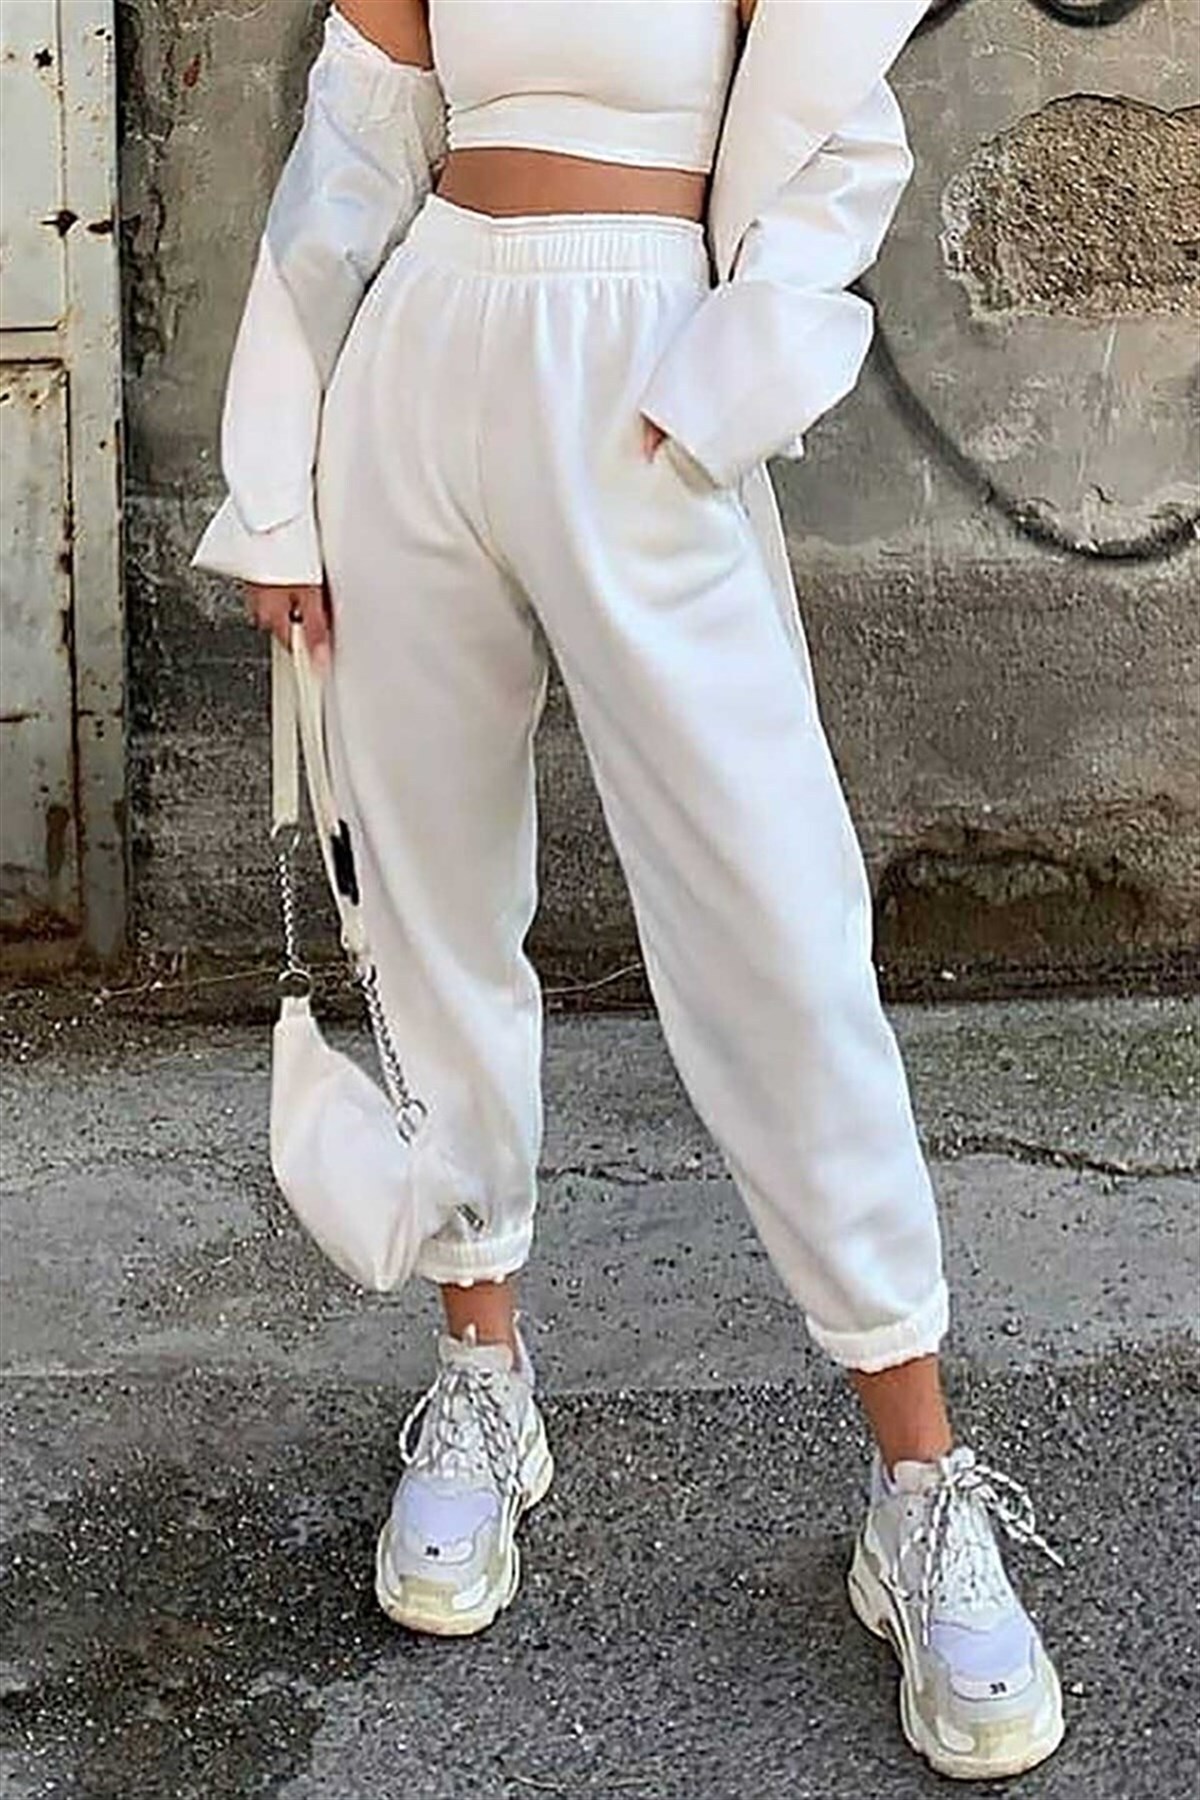 Madmext Mad Girls White Elasticated Oversize Women's Tracksuits Mg324